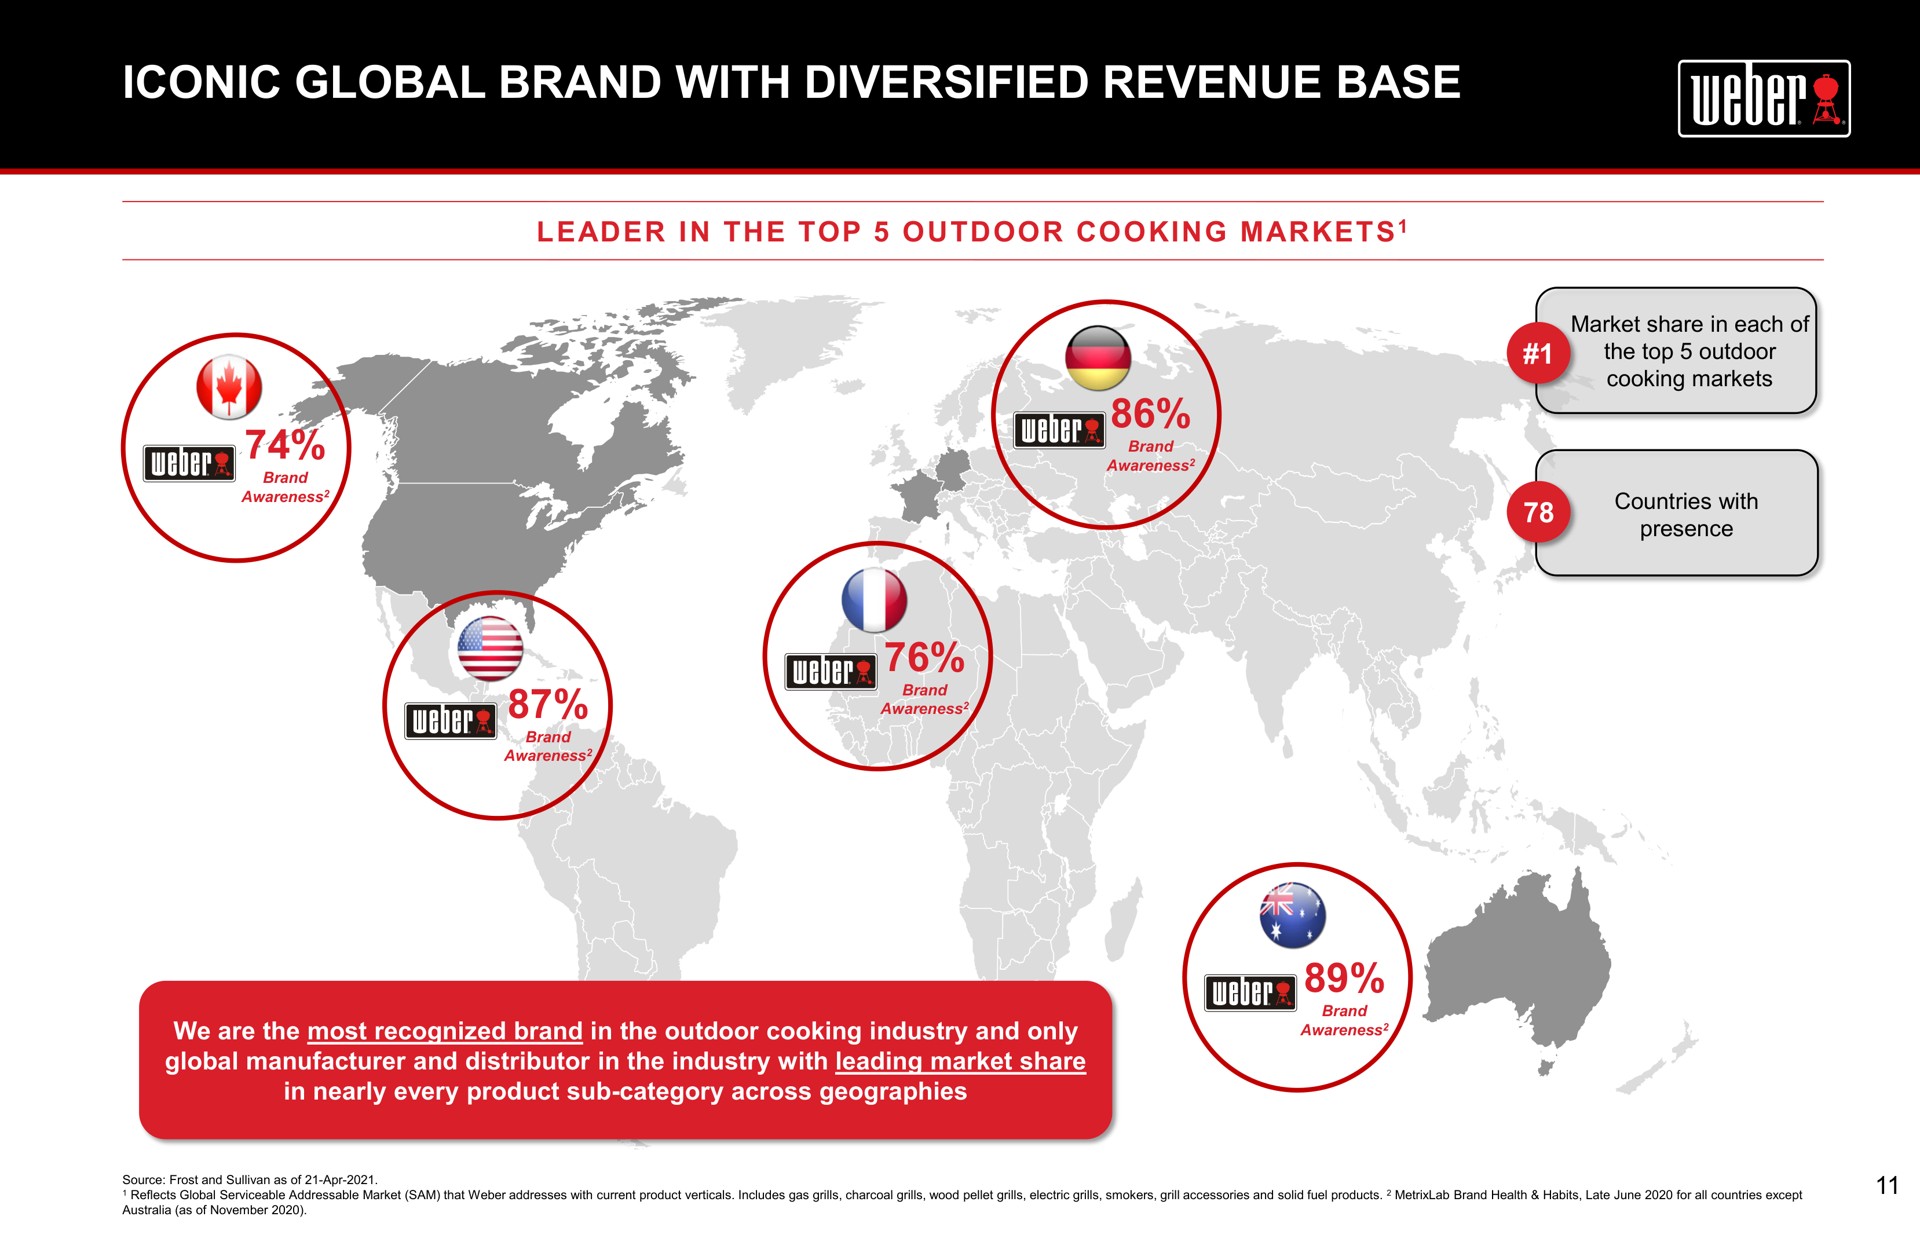 iconic global brand with diversified revenue base coma | Weber